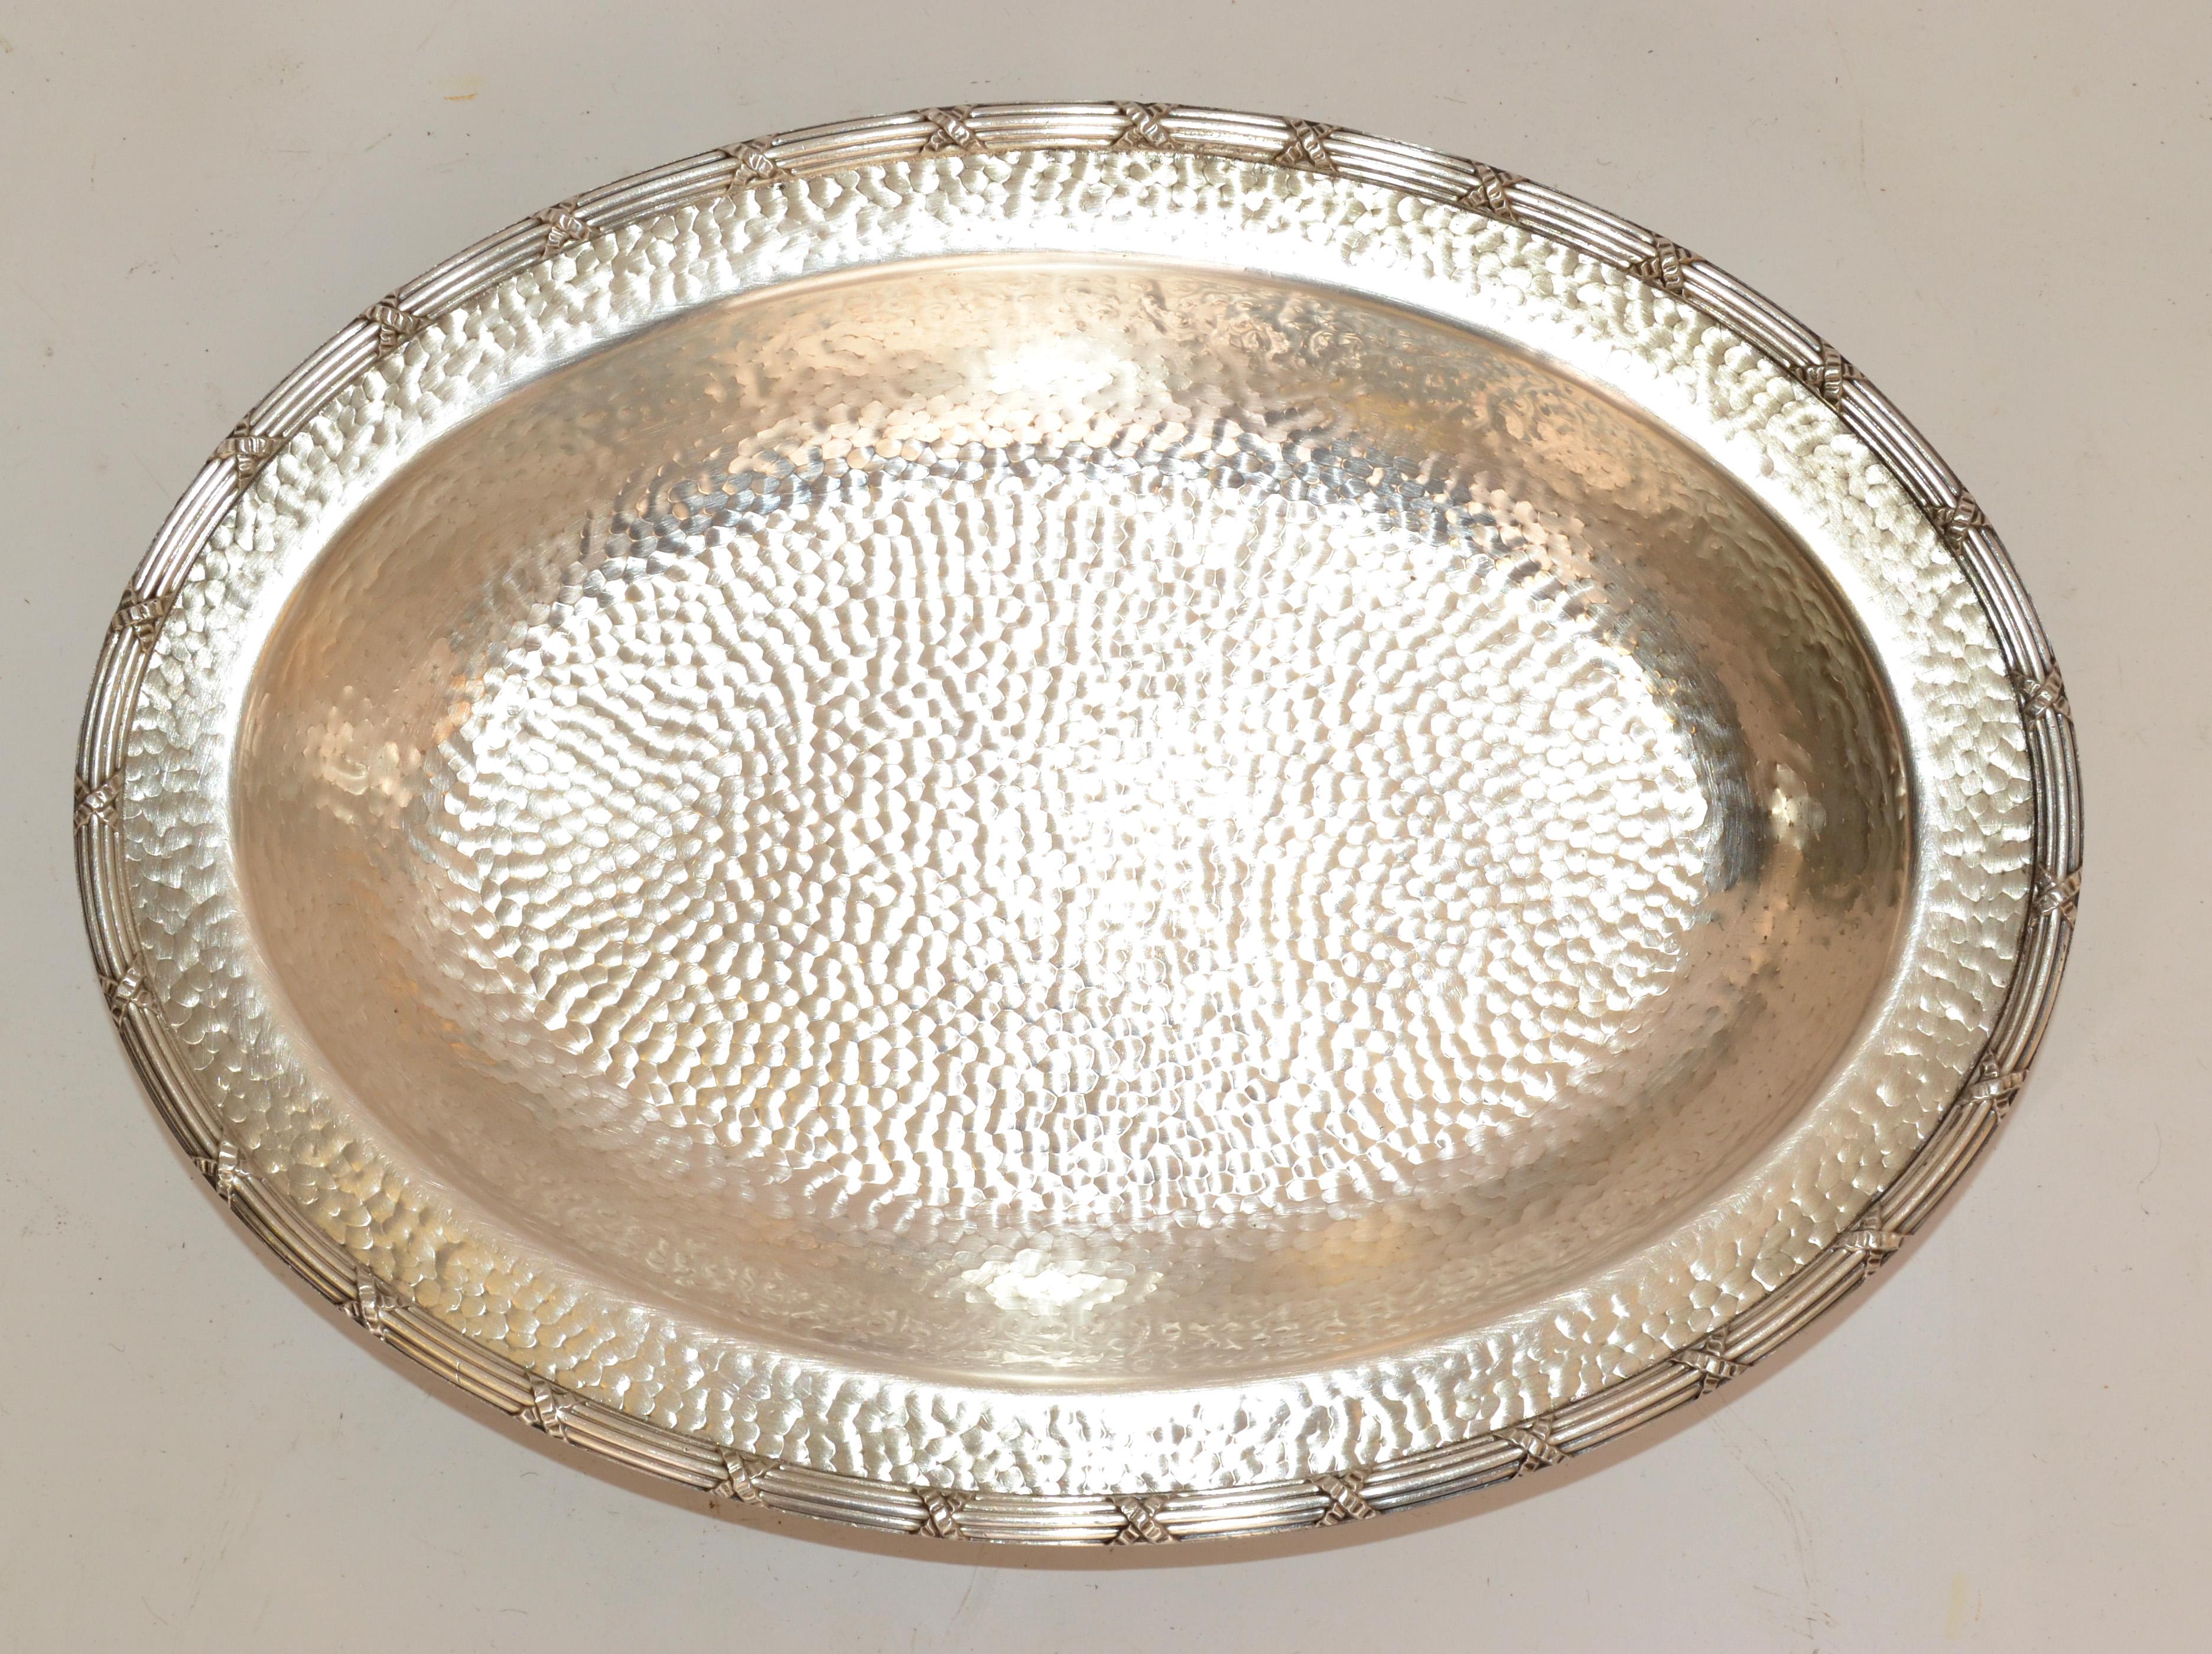 Art Deco 1969 Hand-Hammered Silver Plate EPNS 2245 Centerpiece Decorative Bowl For Sale 4